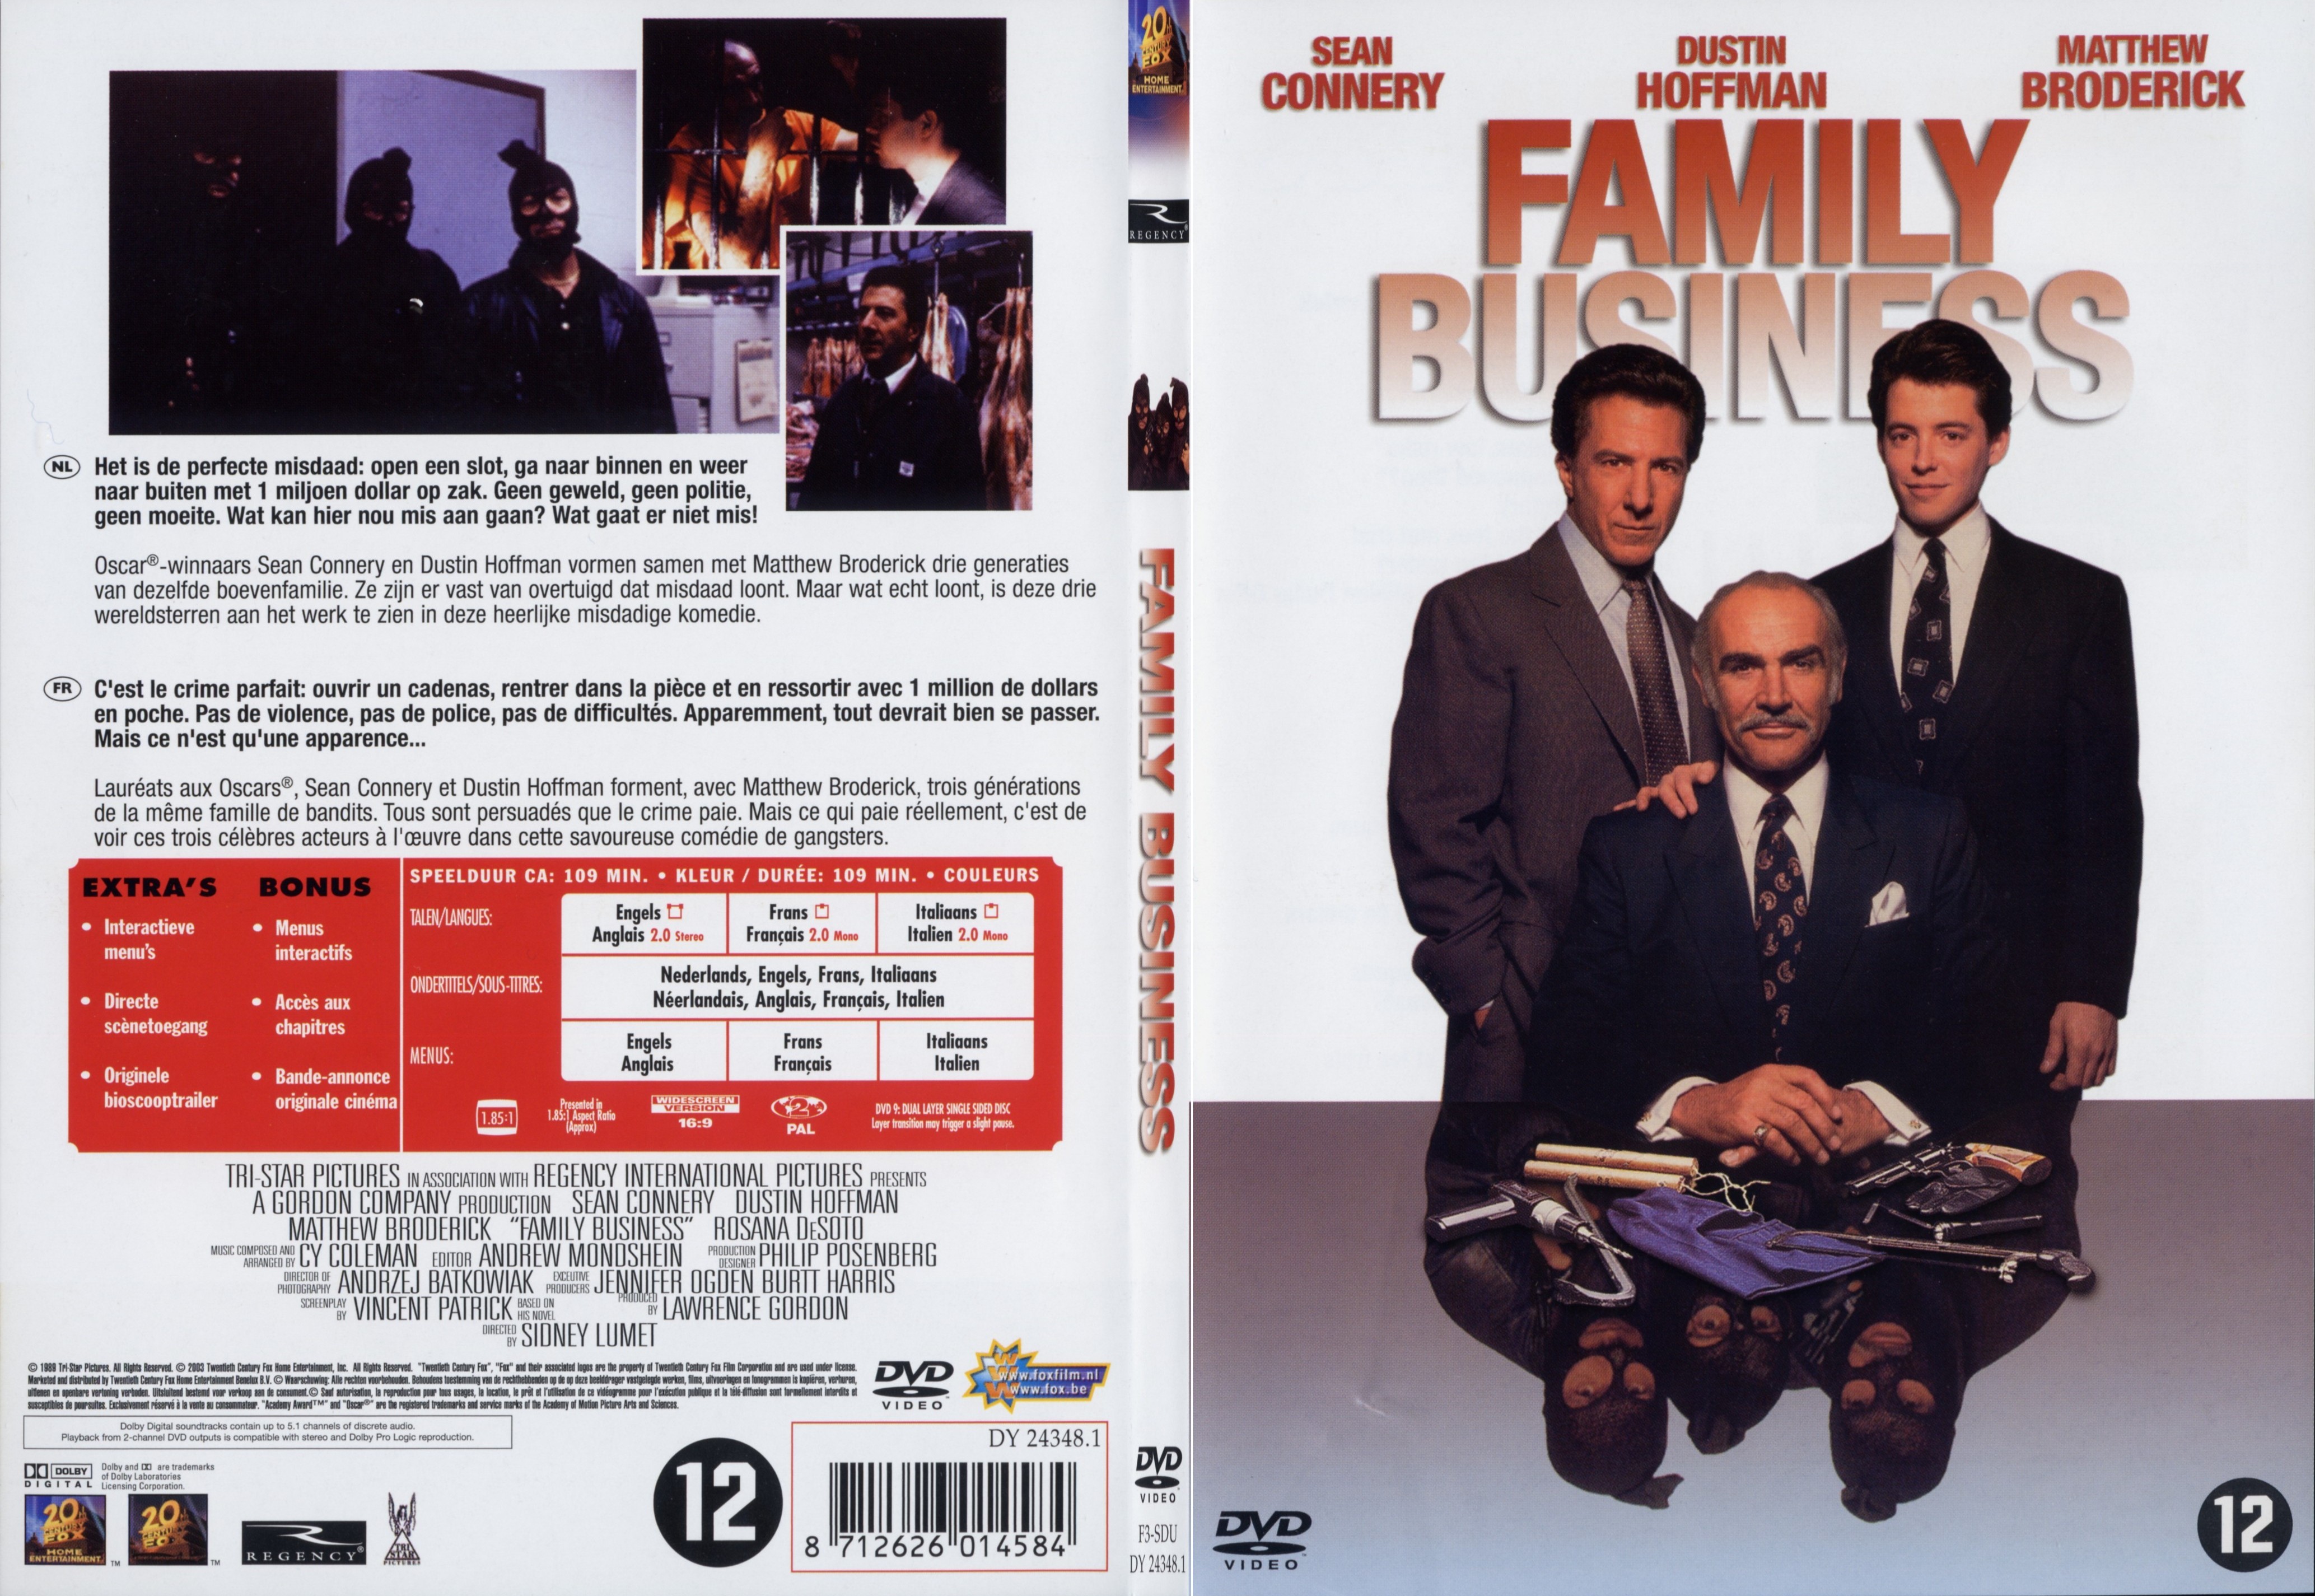 Jaquette DVD Family business - SLIM